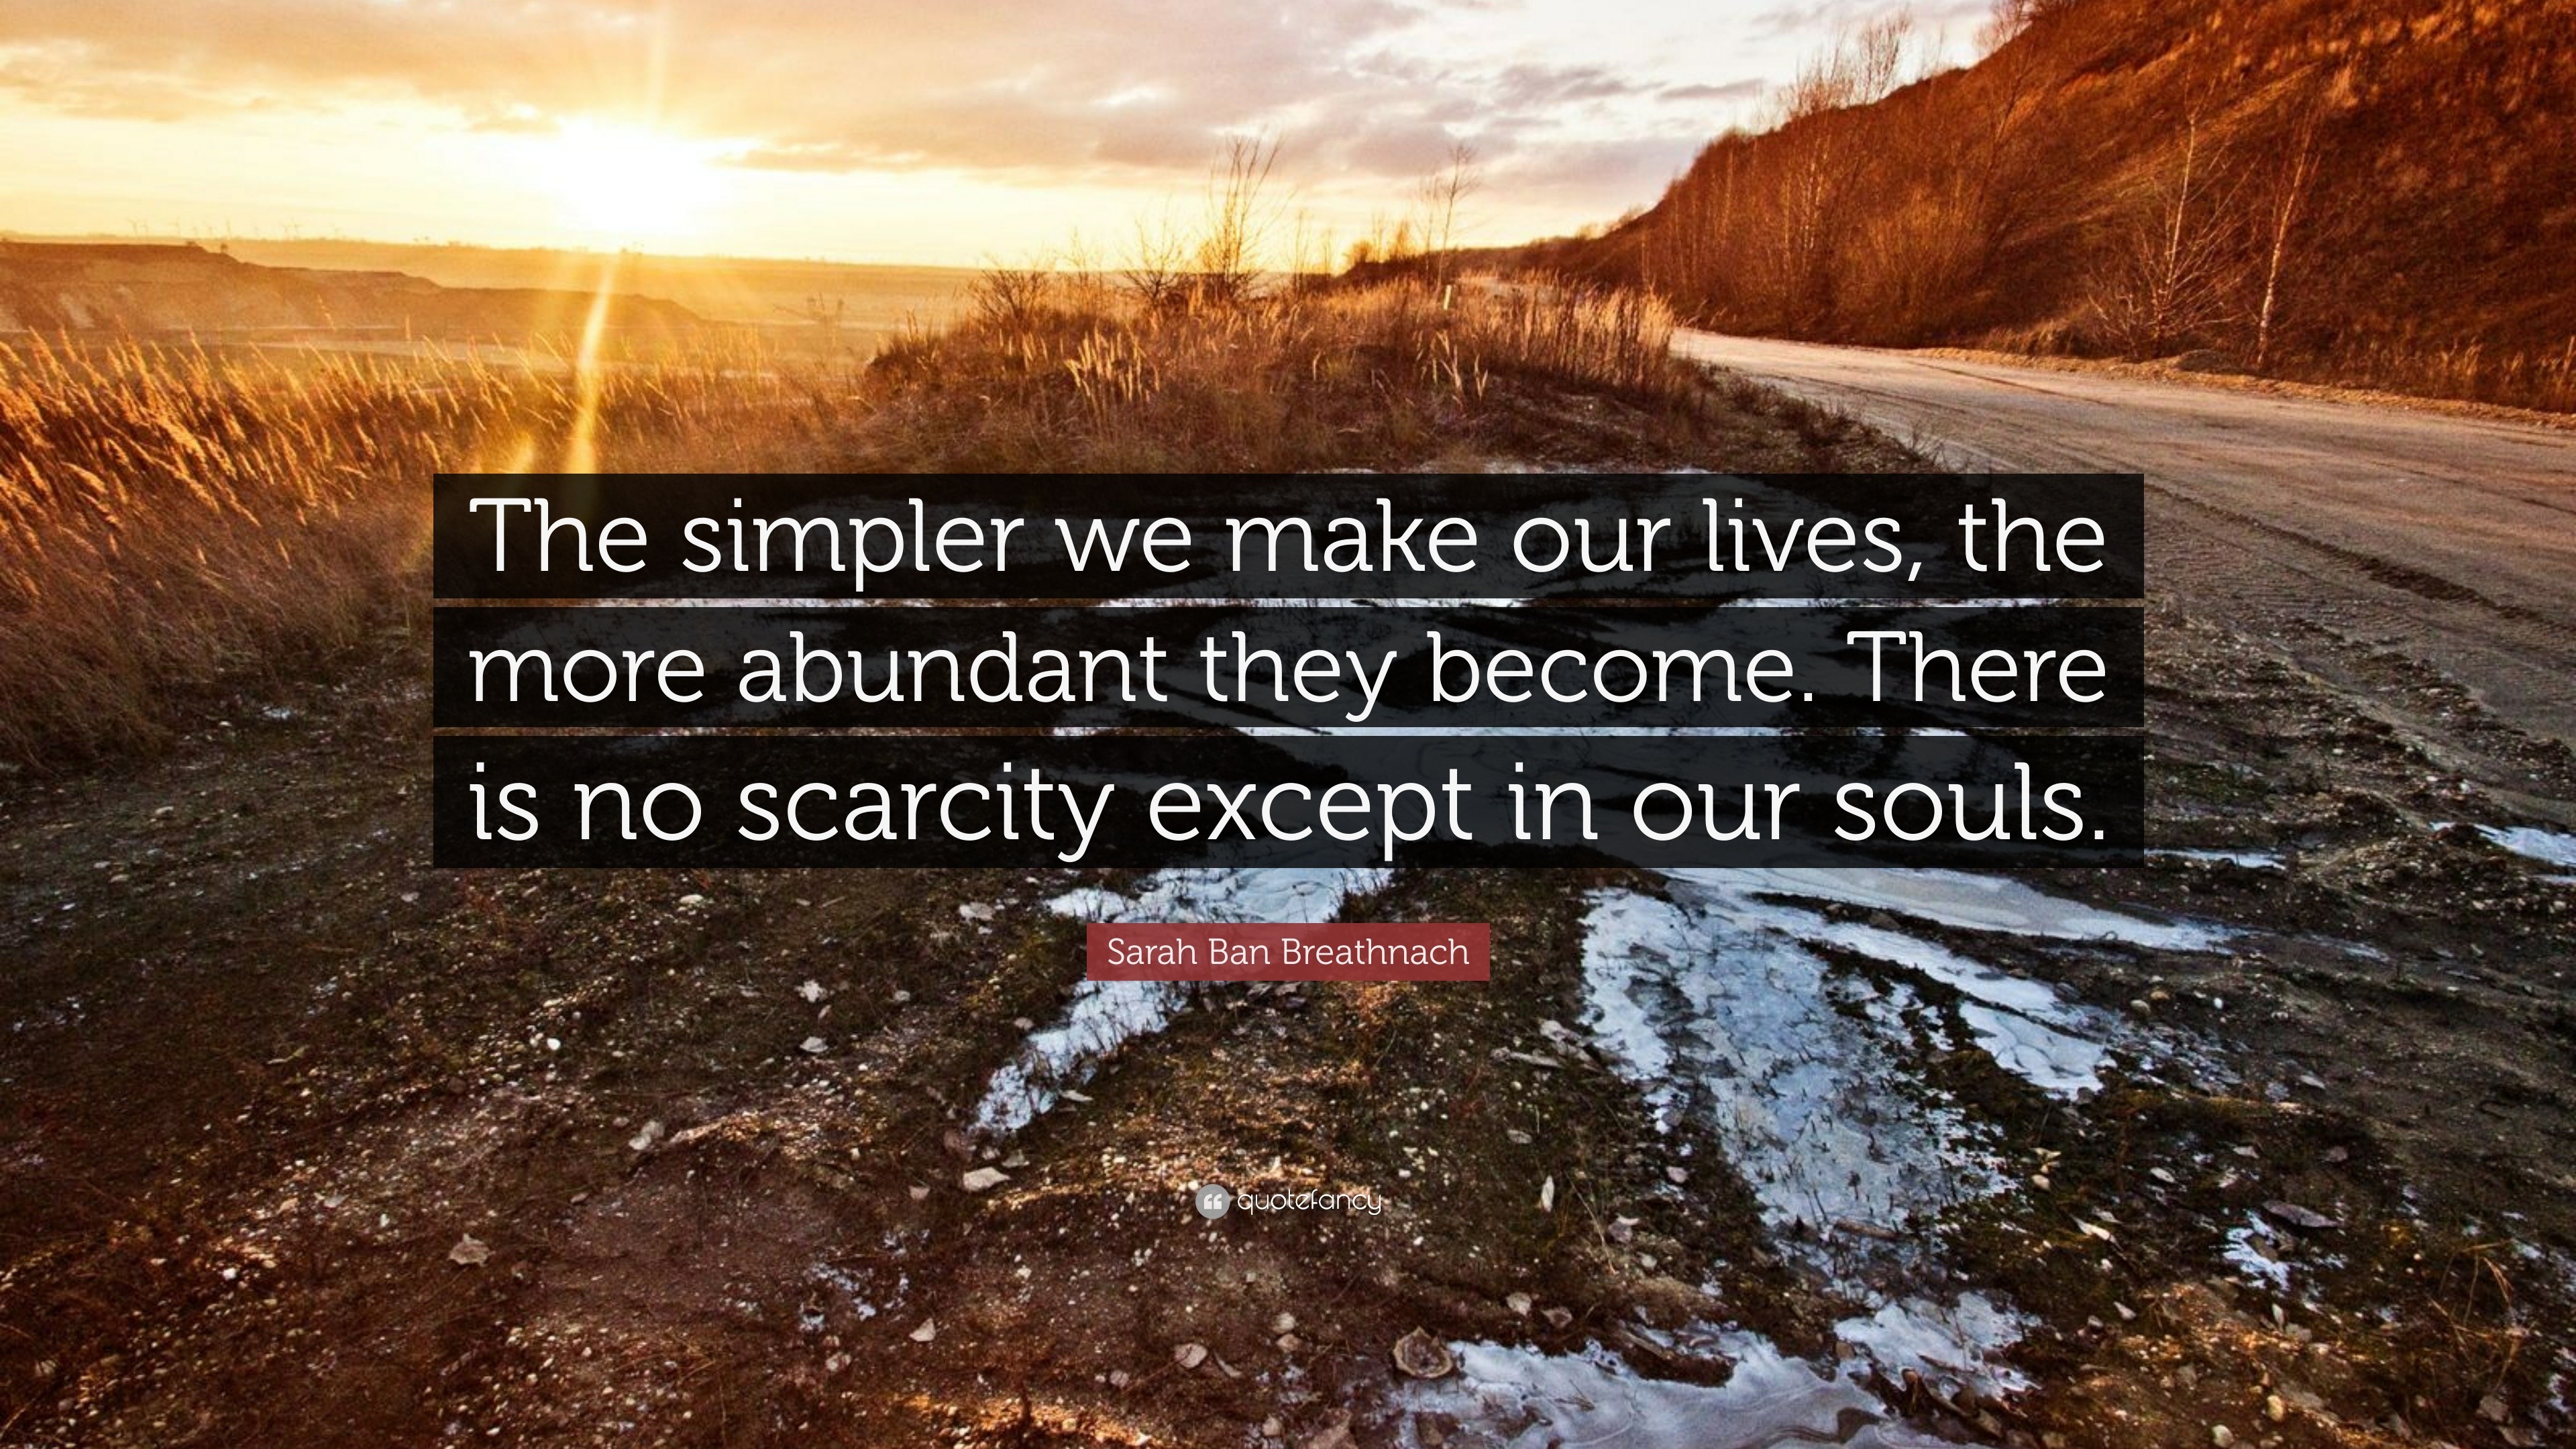 Sarah Ban Breathnach Quote: “The simpler we make our lives, the more ...